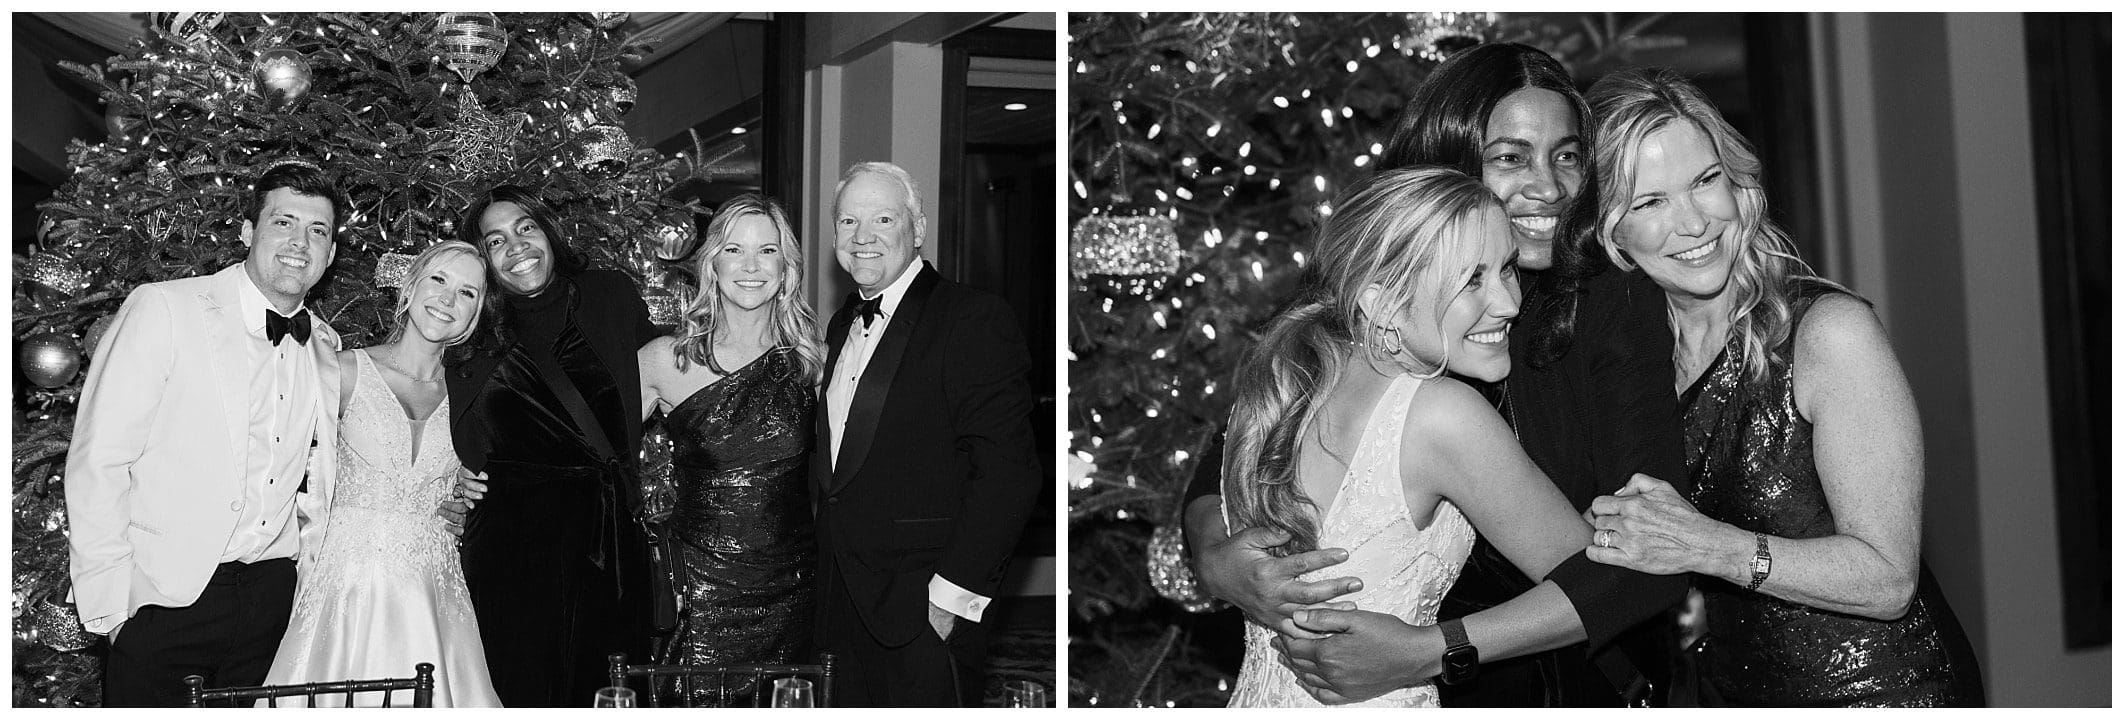 black and white photos of bride and groom with their guests for their Asheville winter wedding